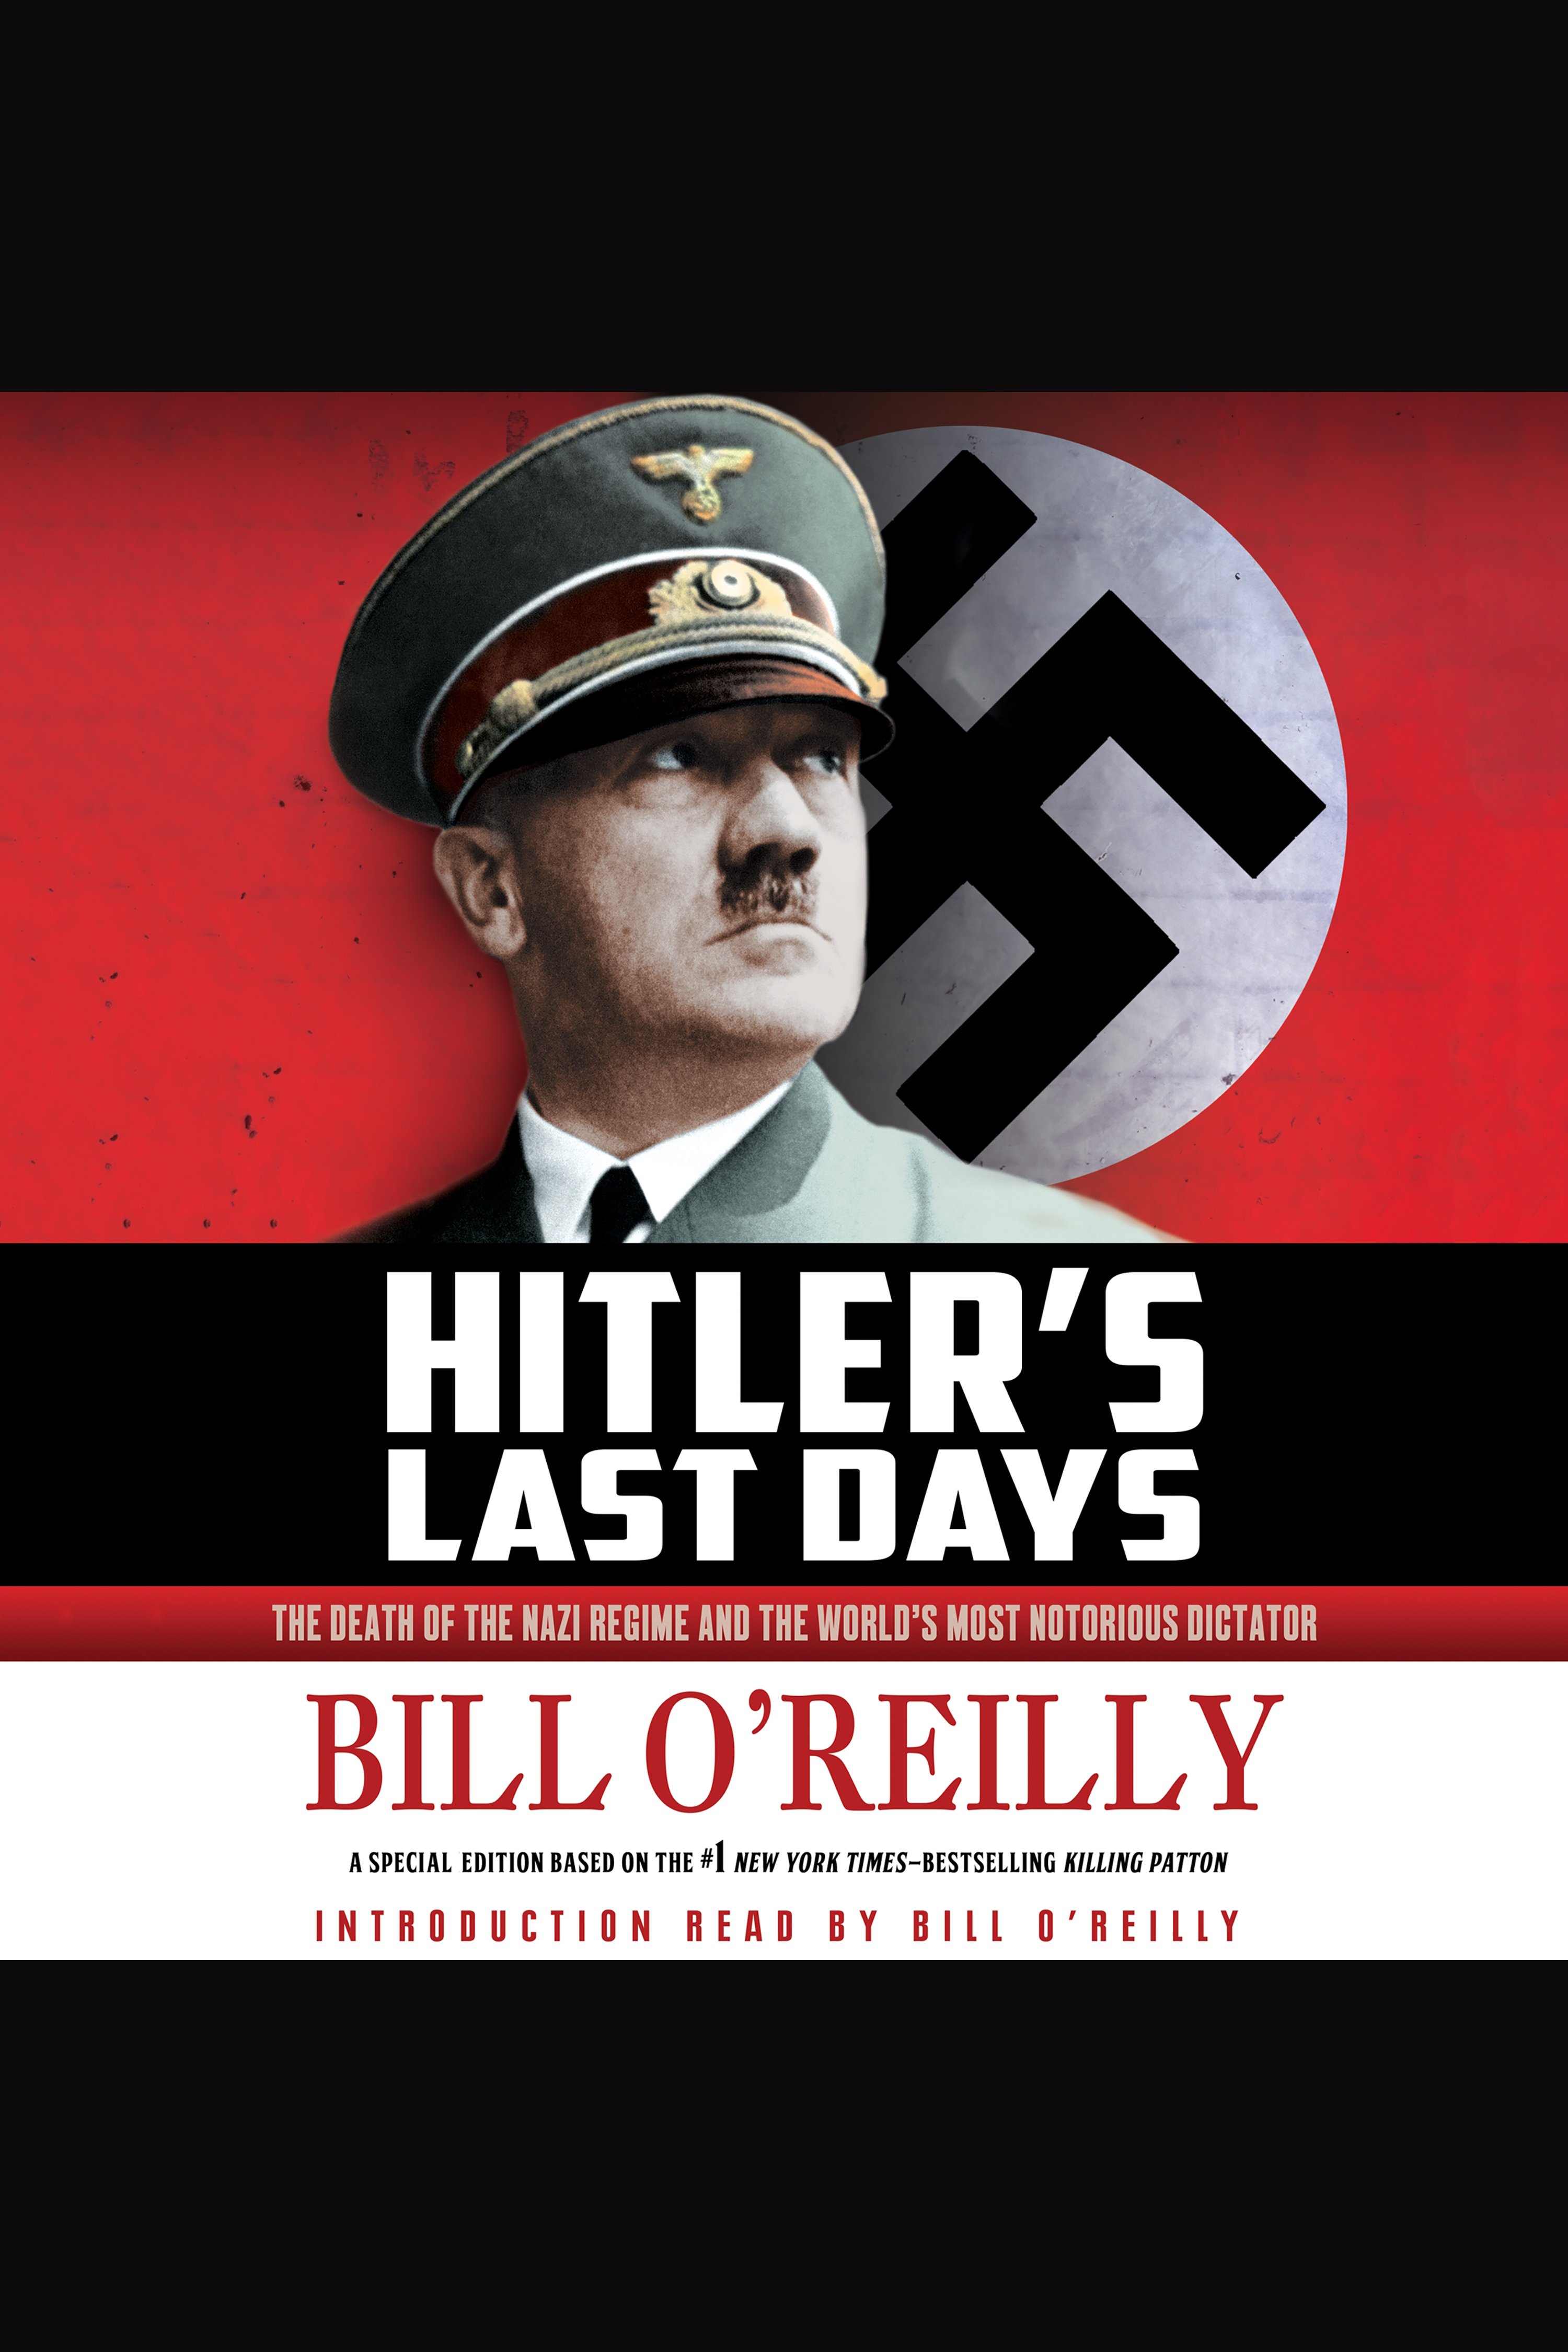 Hitler's Last Days the death of the Nazi regime and the world's most notorious dictator cover image